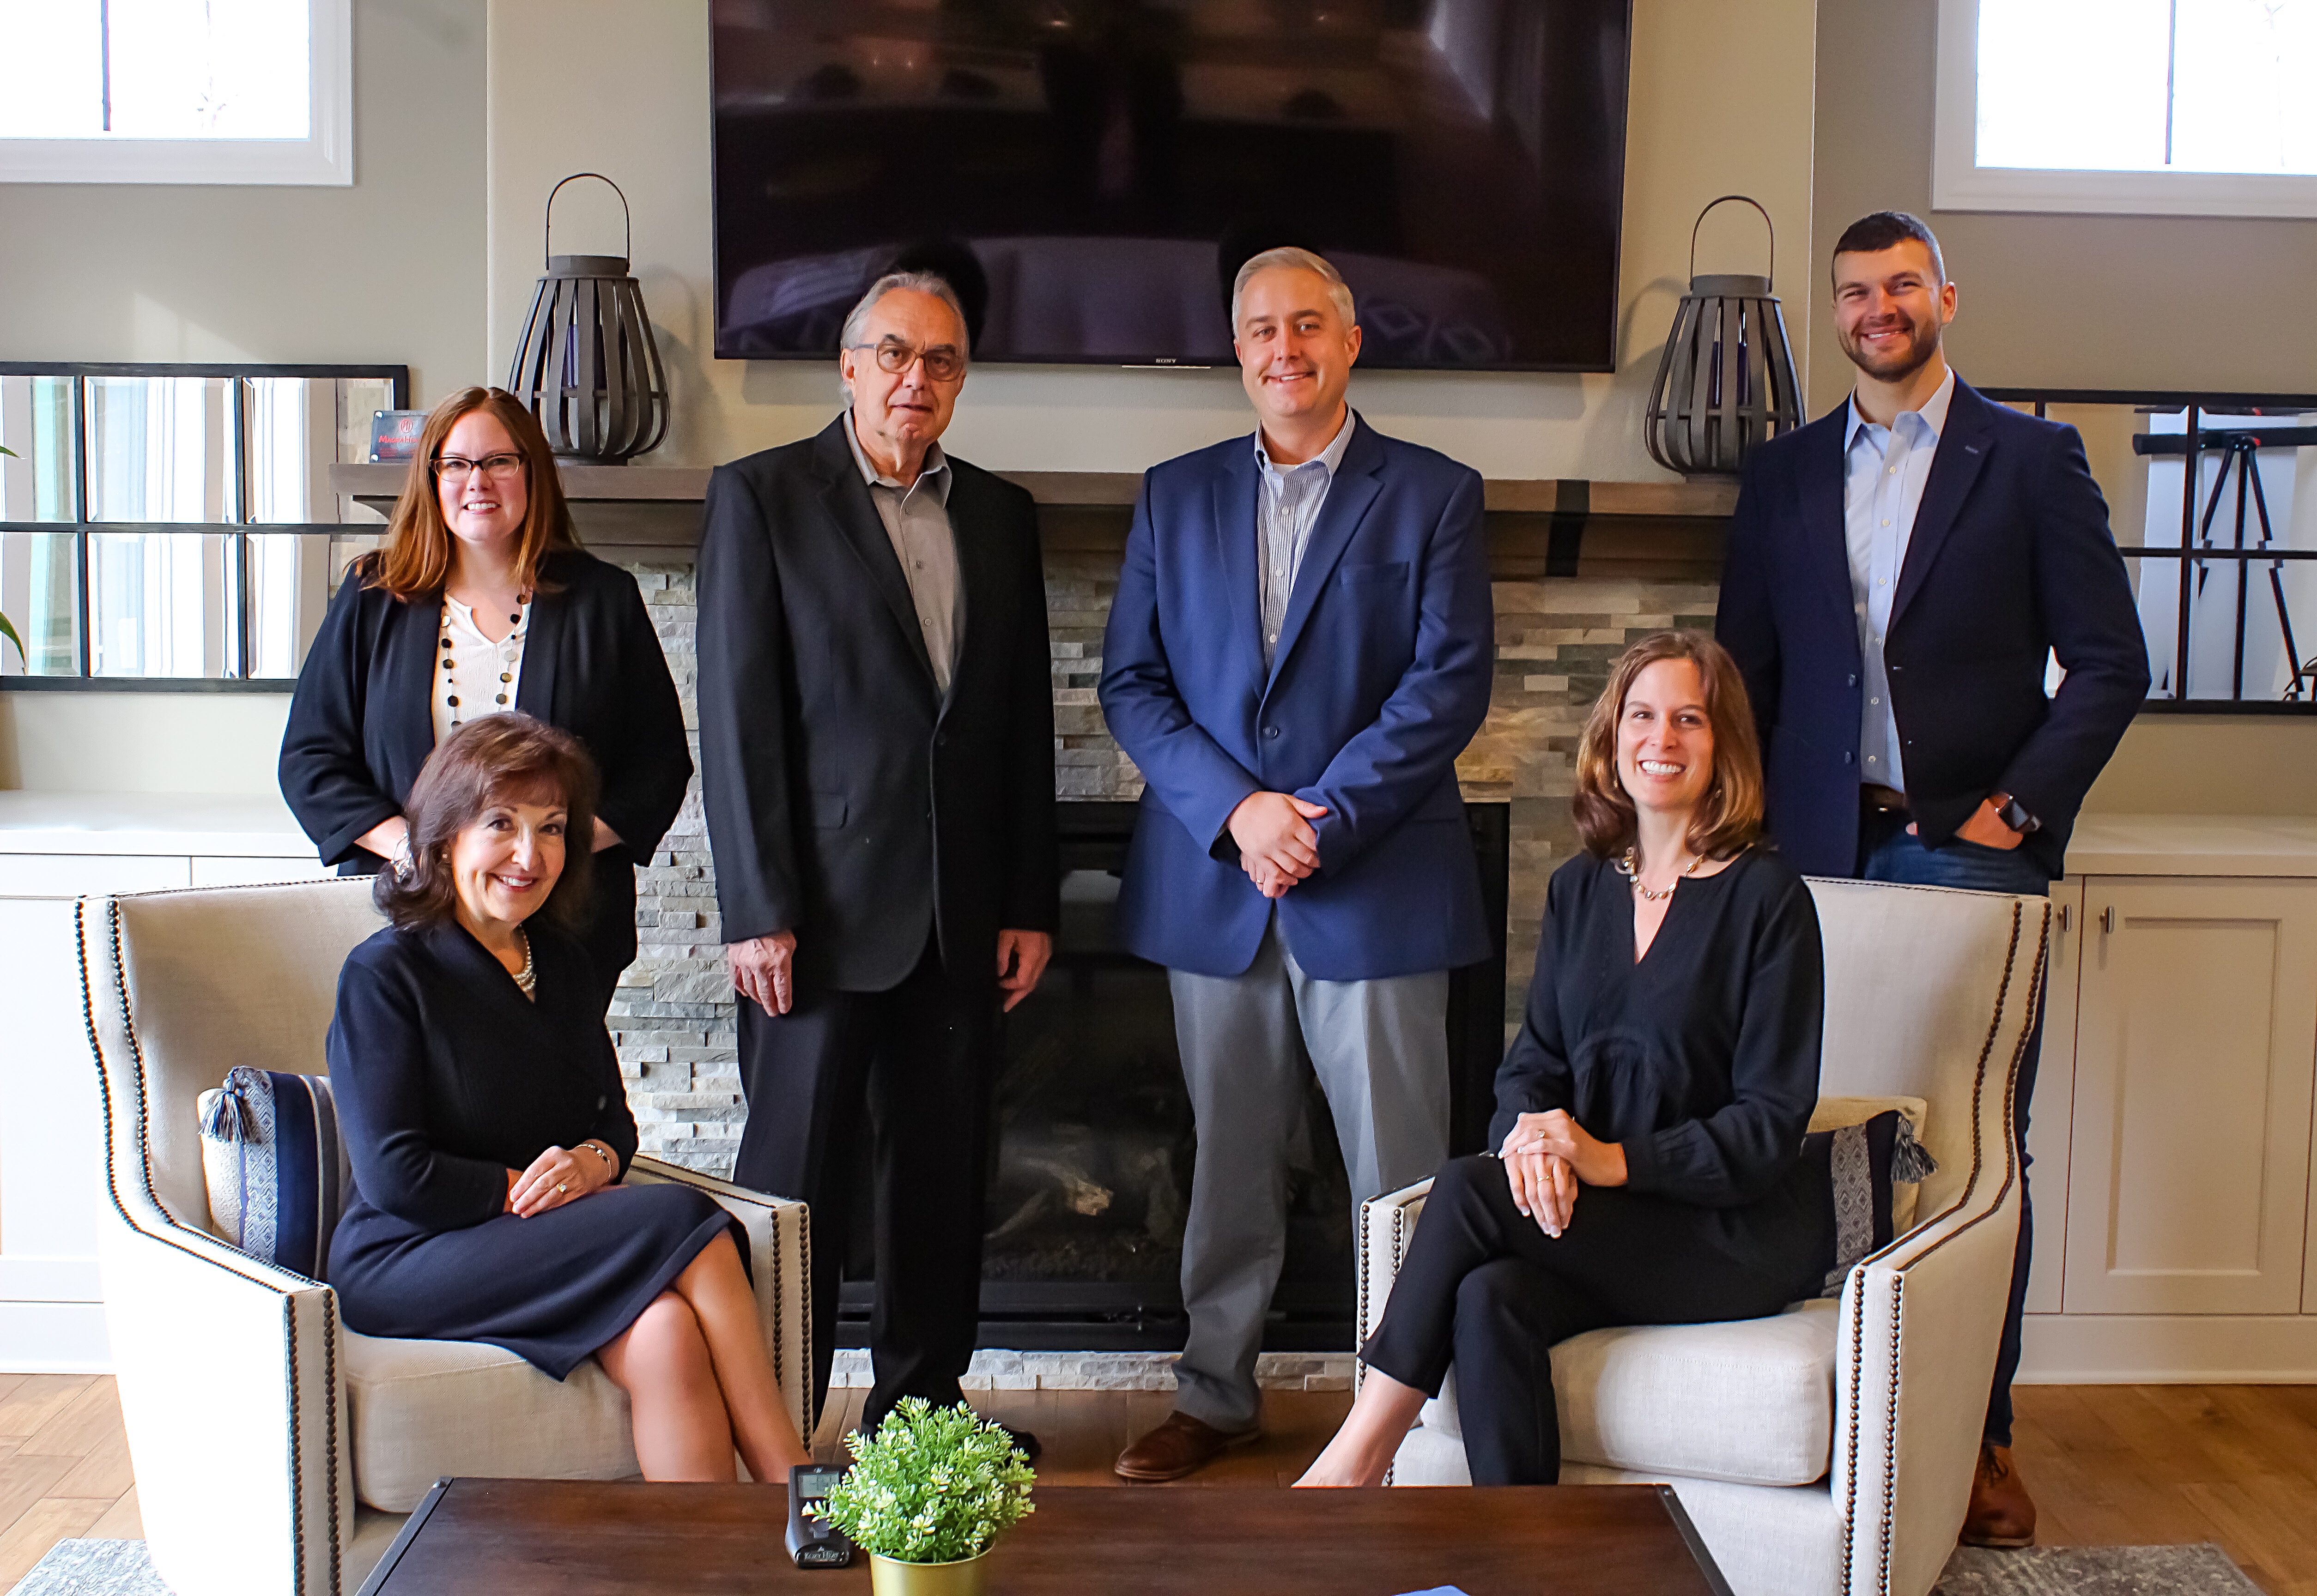 Keller Williams Reality – Milwaukee North Shore grows again with The Nikolic Group addition